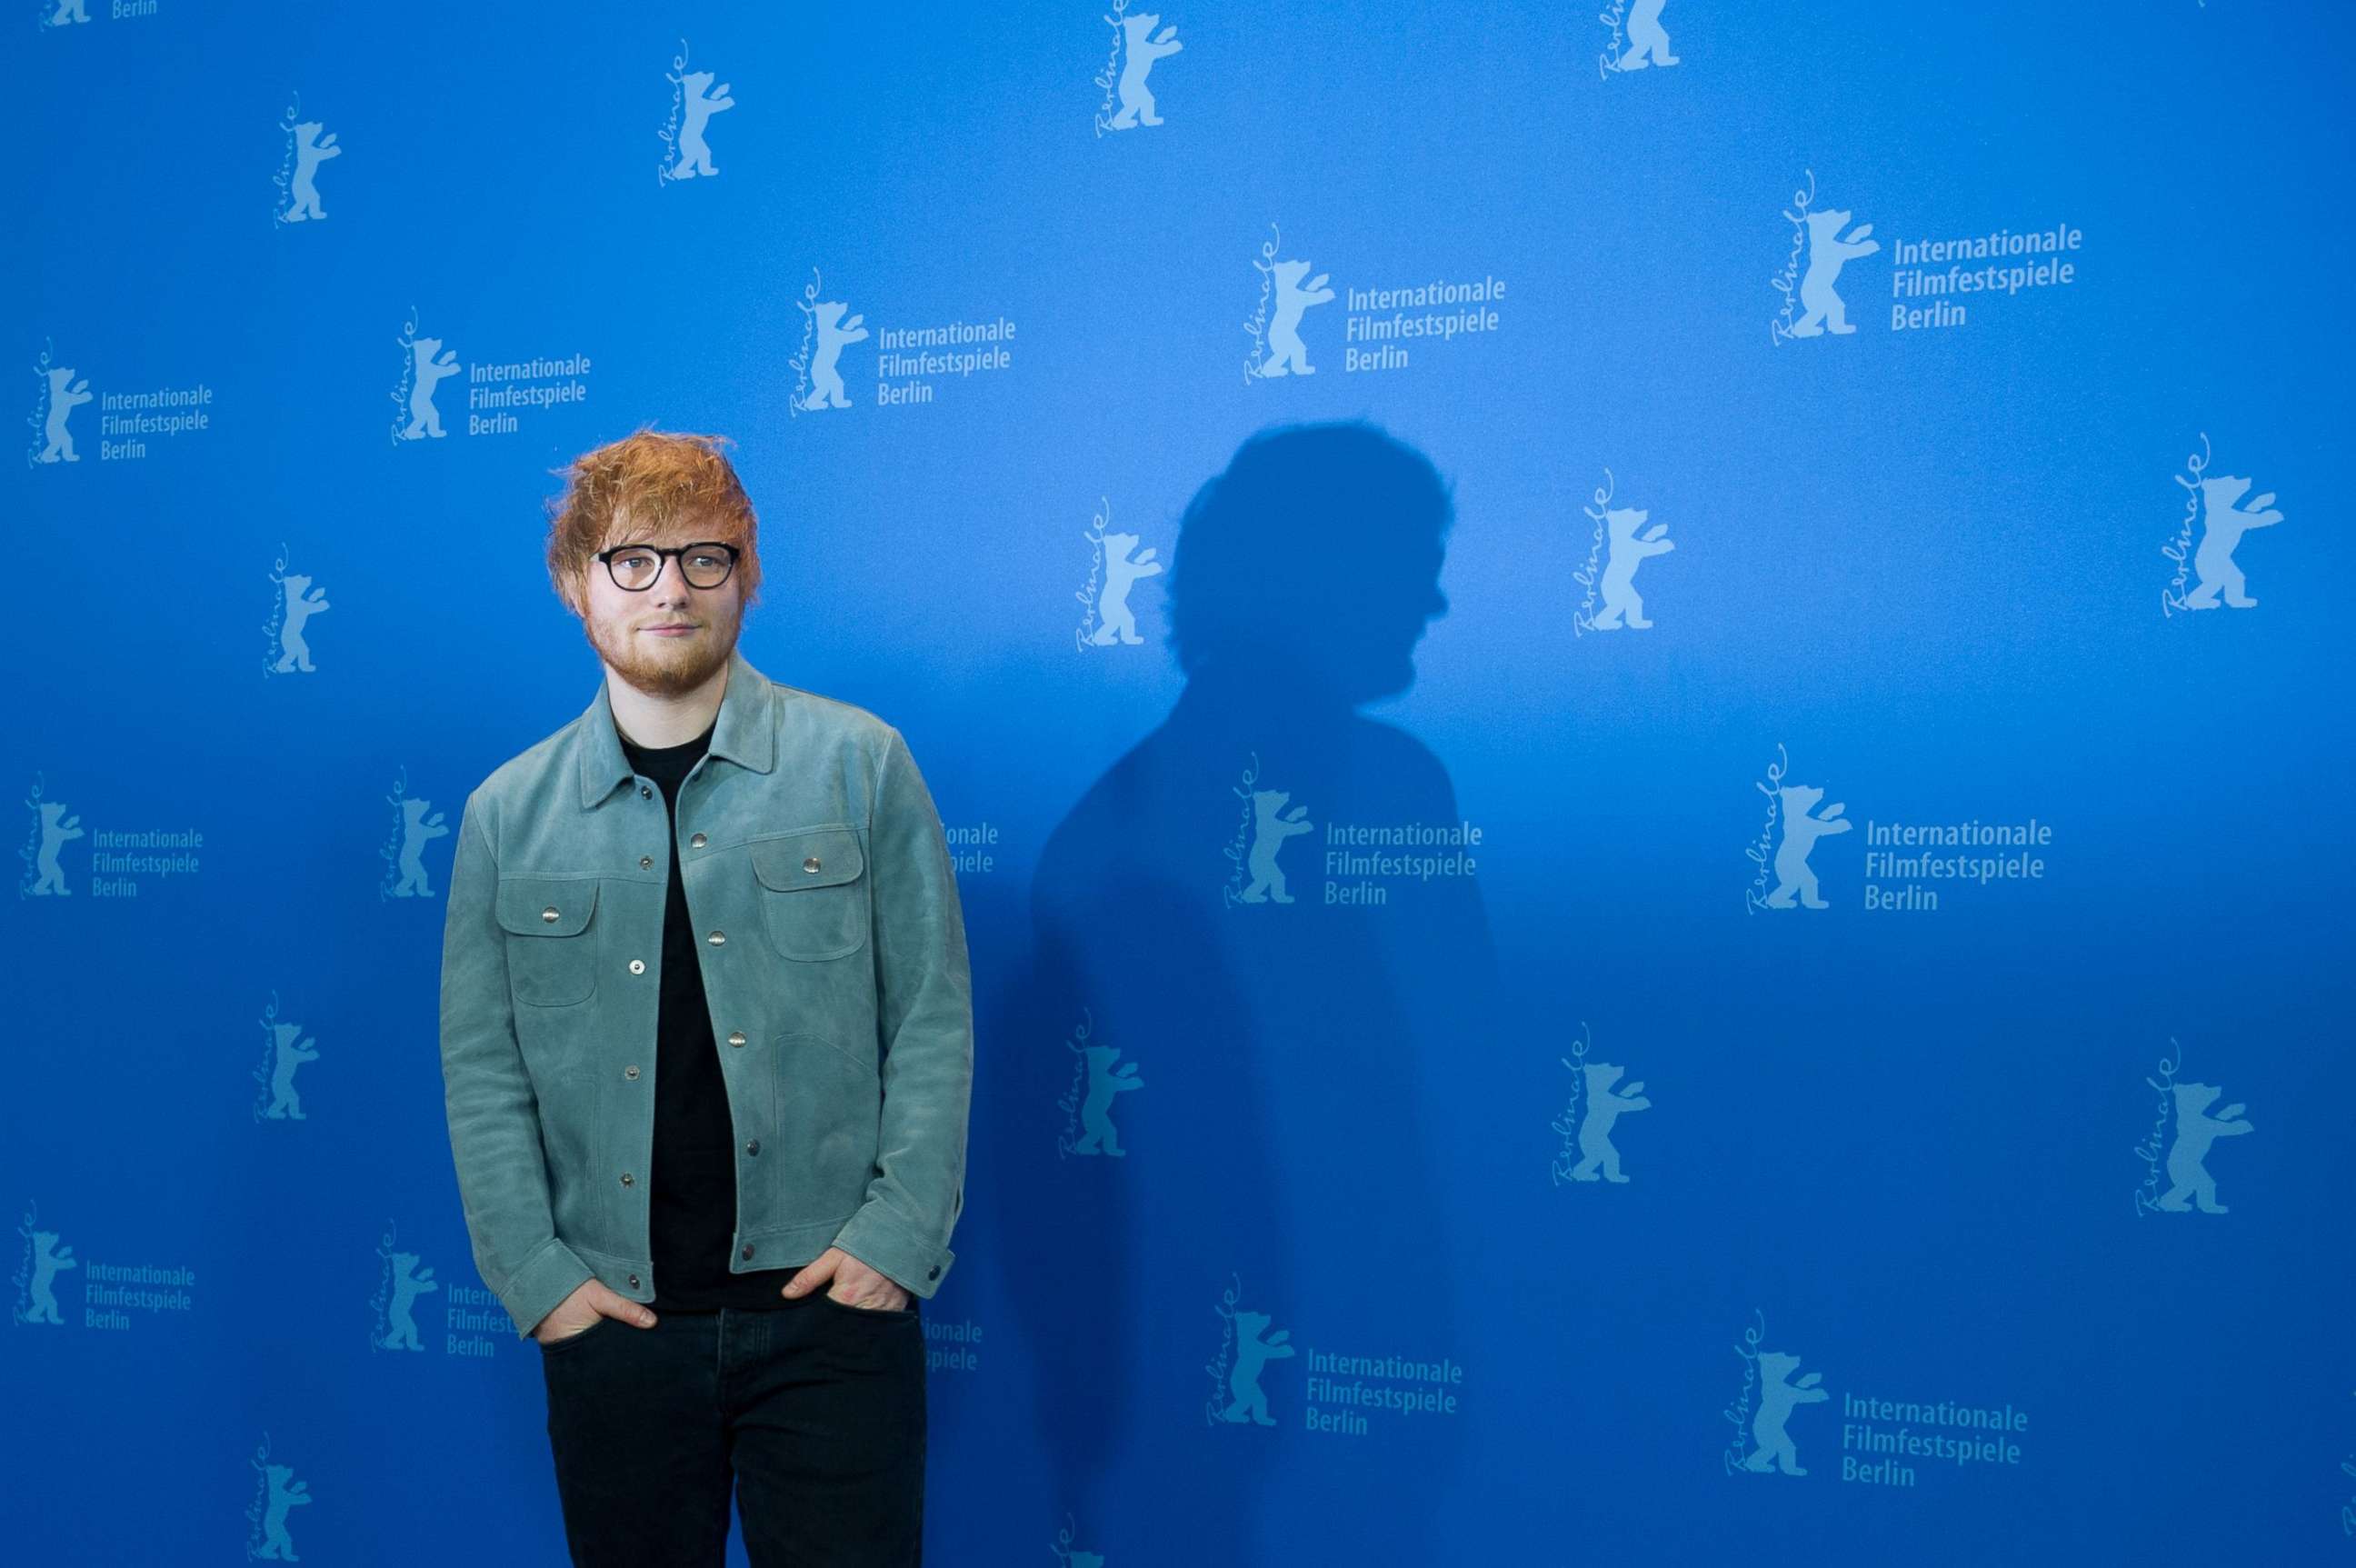 PHOTO: Singer-songwriter Ed Sheeran poses at an event for the film "Songwriter" at the Berlinale film festival in Berlin on Feb. 23, 2018.